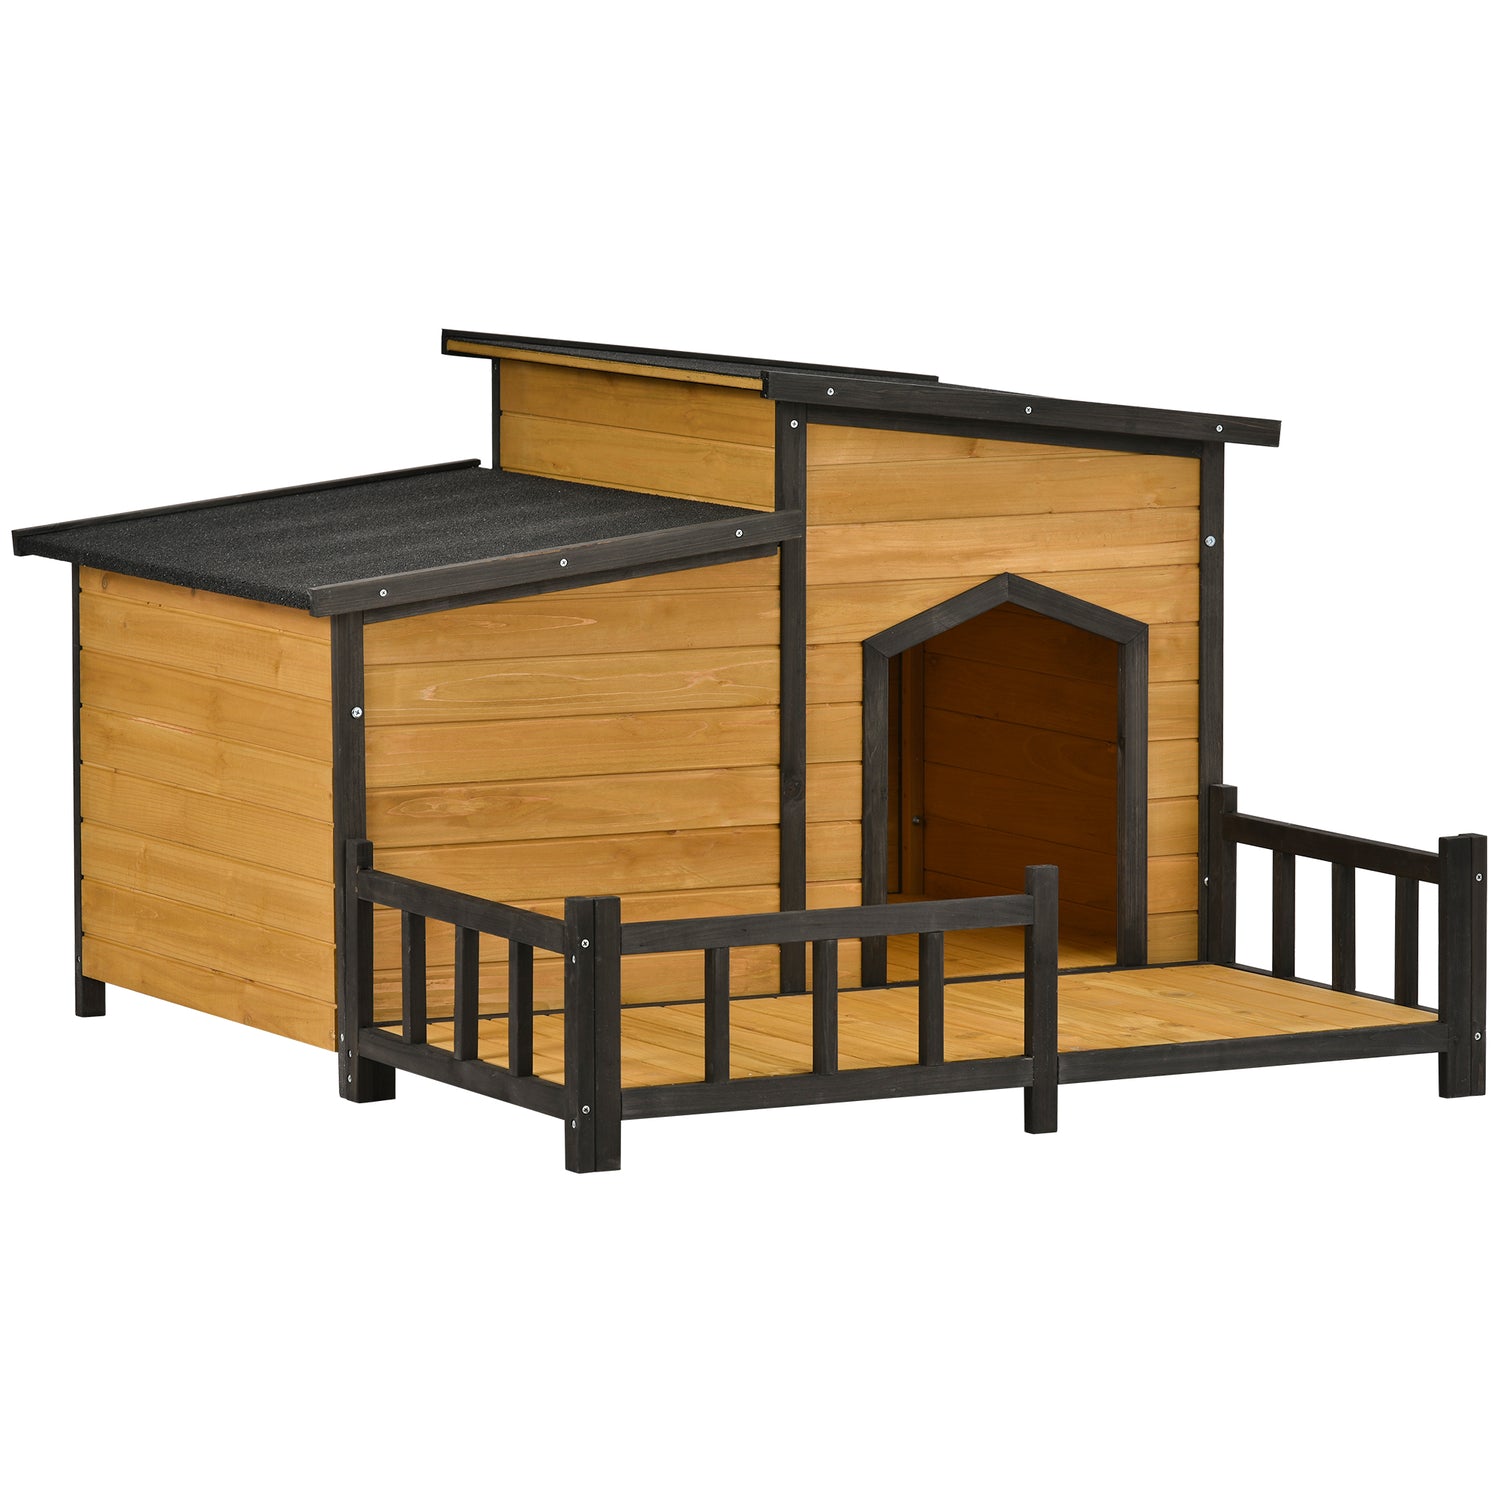 Atotoa 47.2" Large Wooden Dog House Outdoor, Outdoor & Indoor Dog Crate, Cabin Style, with Porch